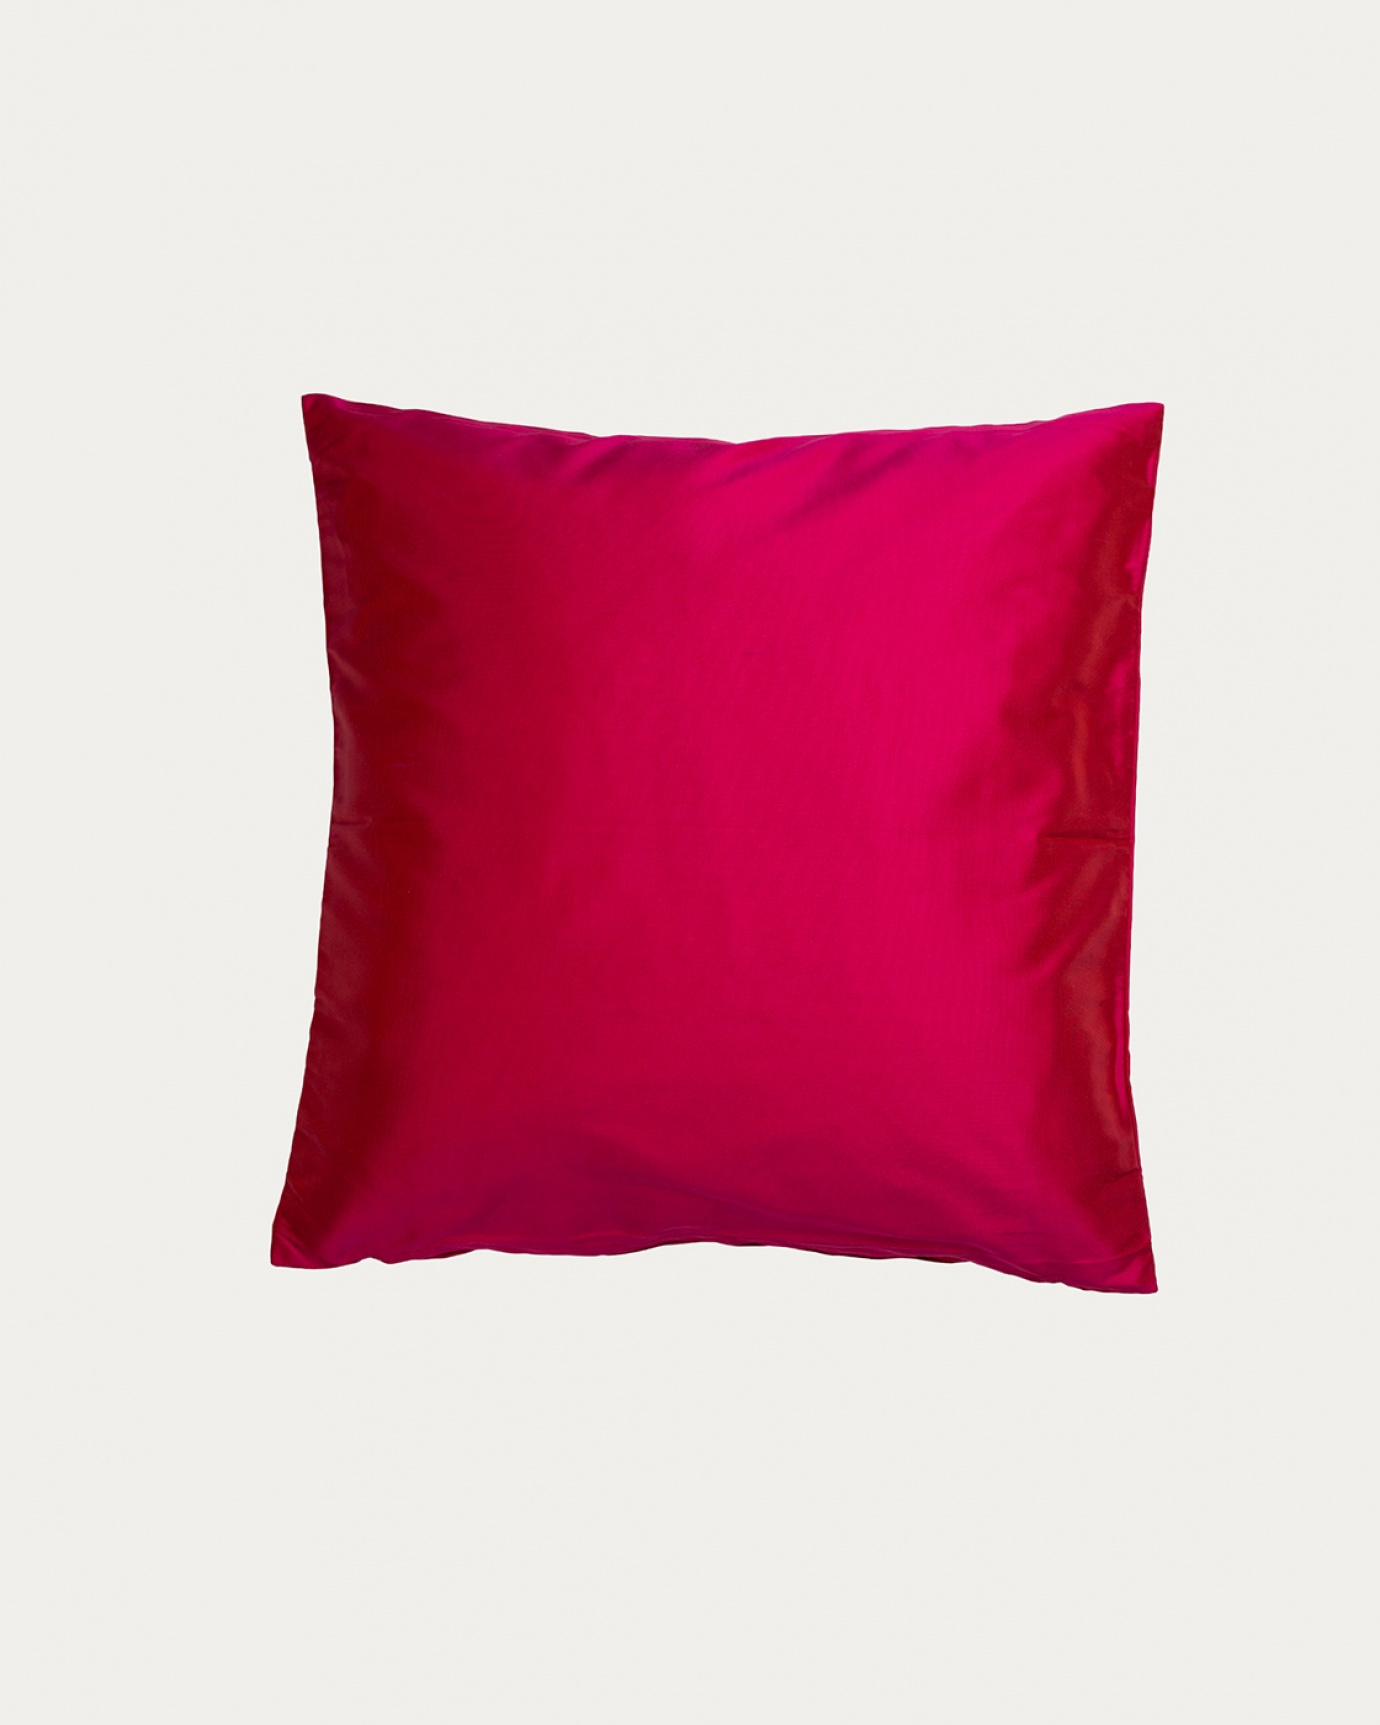 Product image fuchsia red SILK cushion cover made of 100% dupion silk that gives a nice lustre from LINUM DESIGN. Size 40x40 cm.